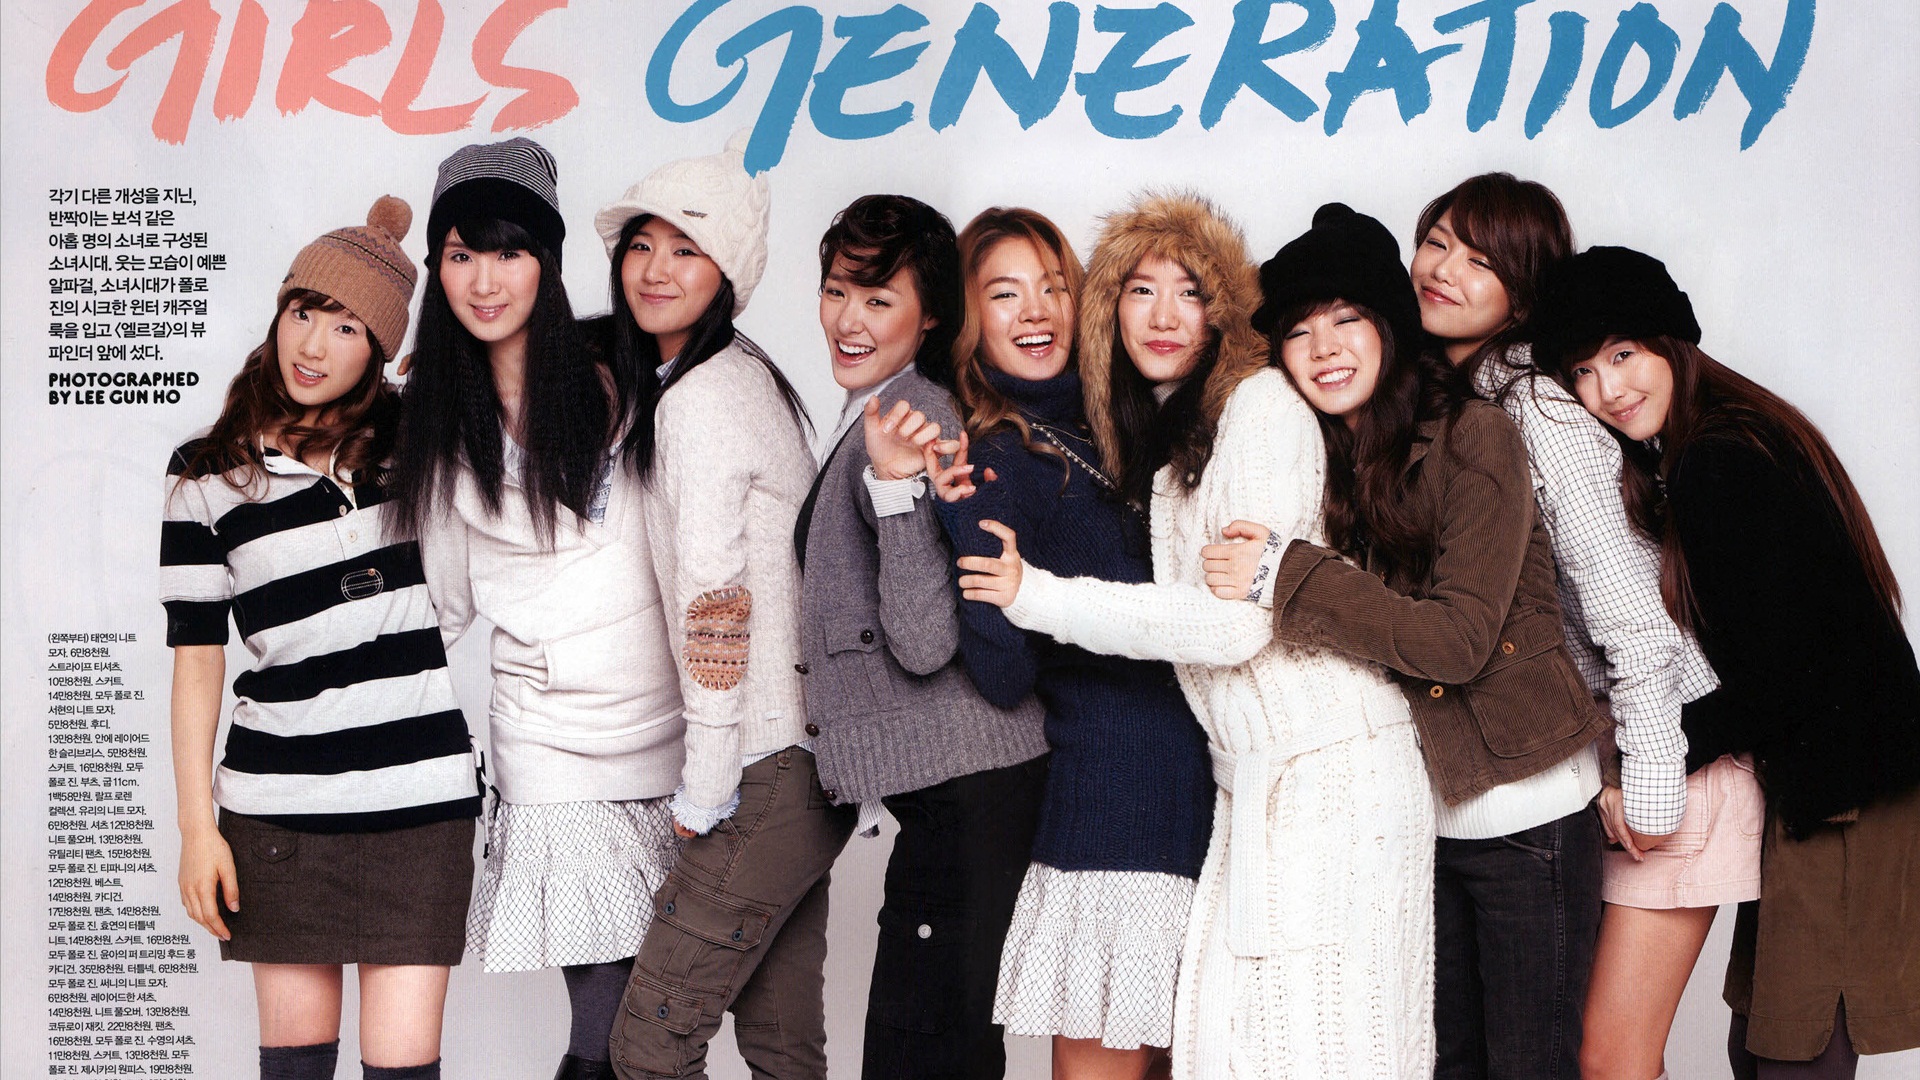 Girls Generation latest HD wallpapers collection #23 - 1920x1080